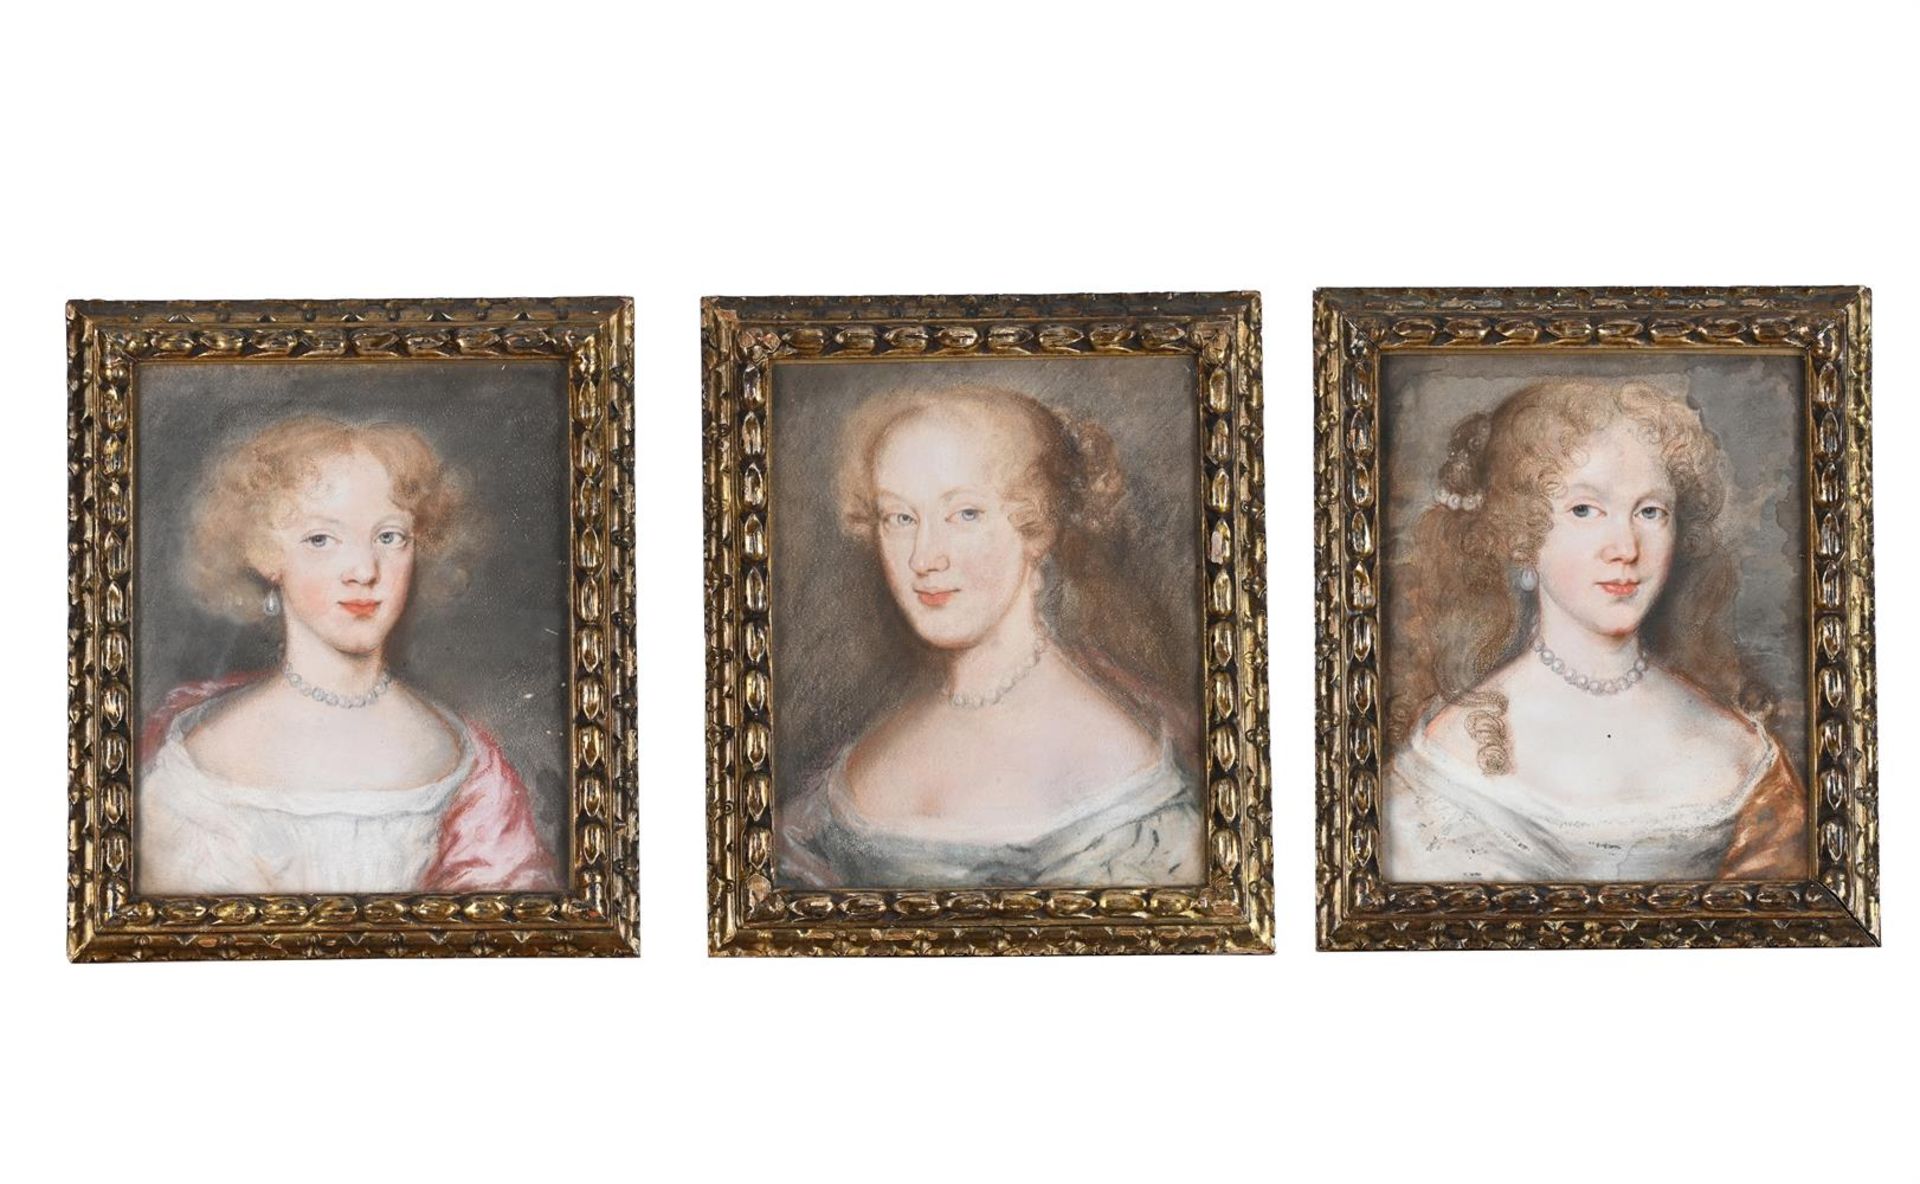 ATTRIBUTED TO JOHN GREENHILL (BRITISH C. 1644-1676), A SET OF THREE PASTEL PORTRAITS - Image 5 of 6